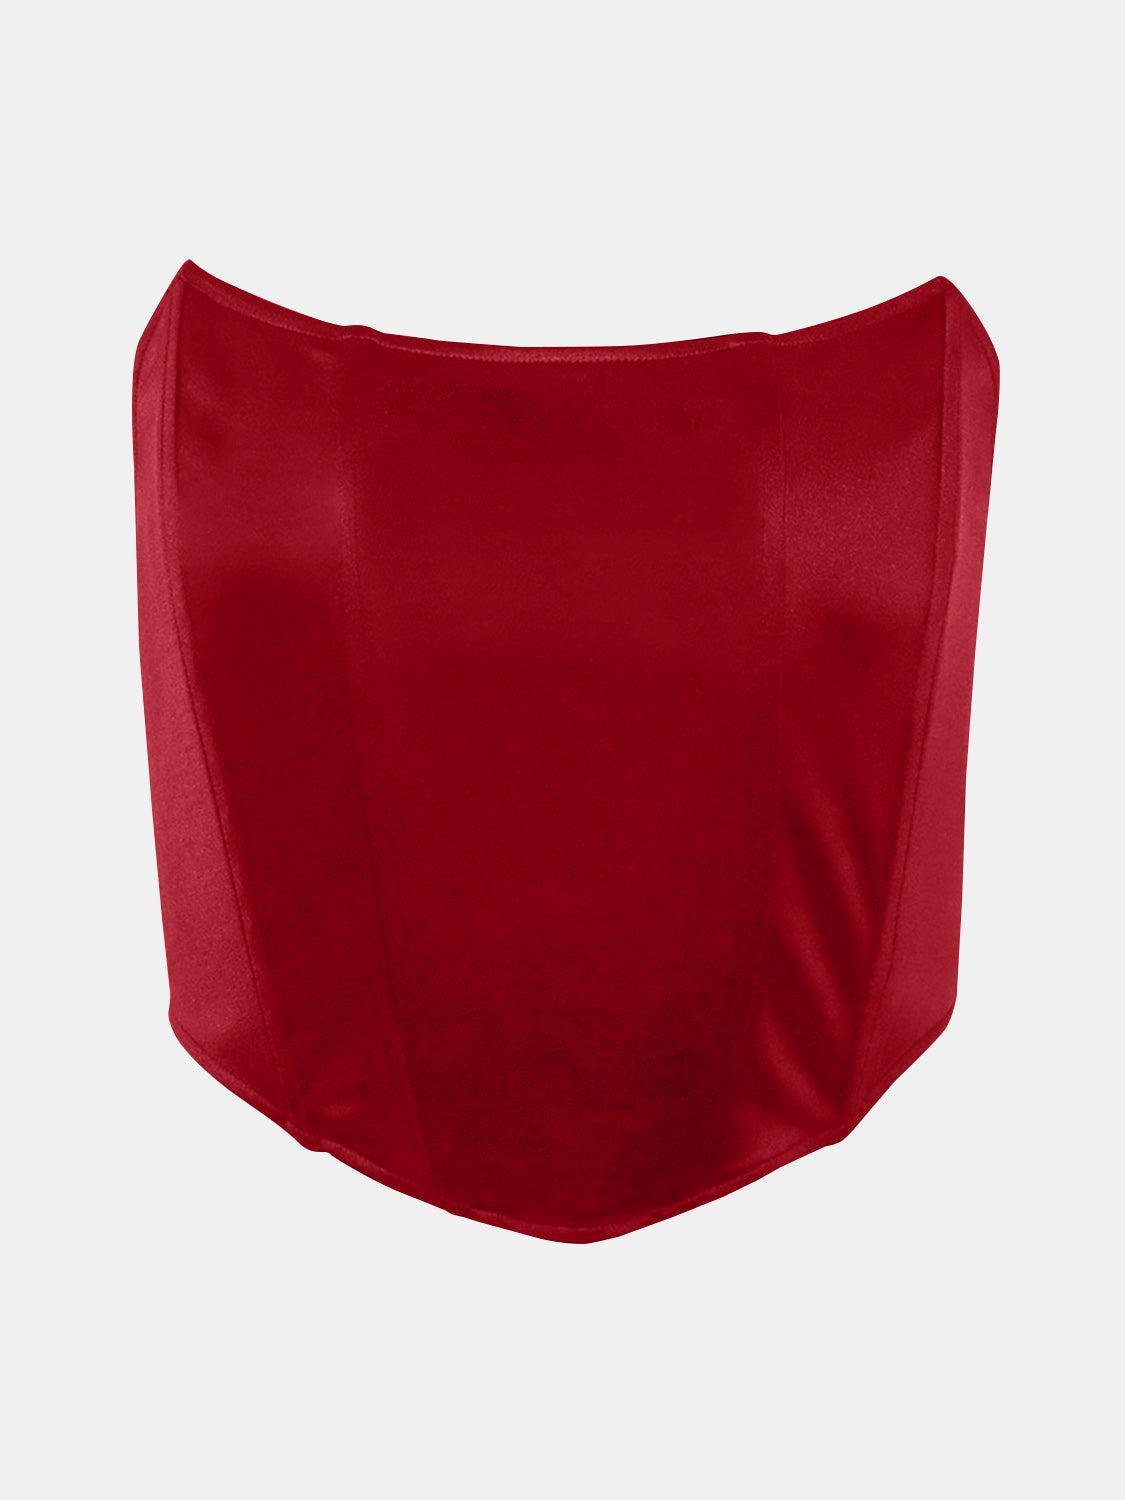 a women's red top with a high neckline